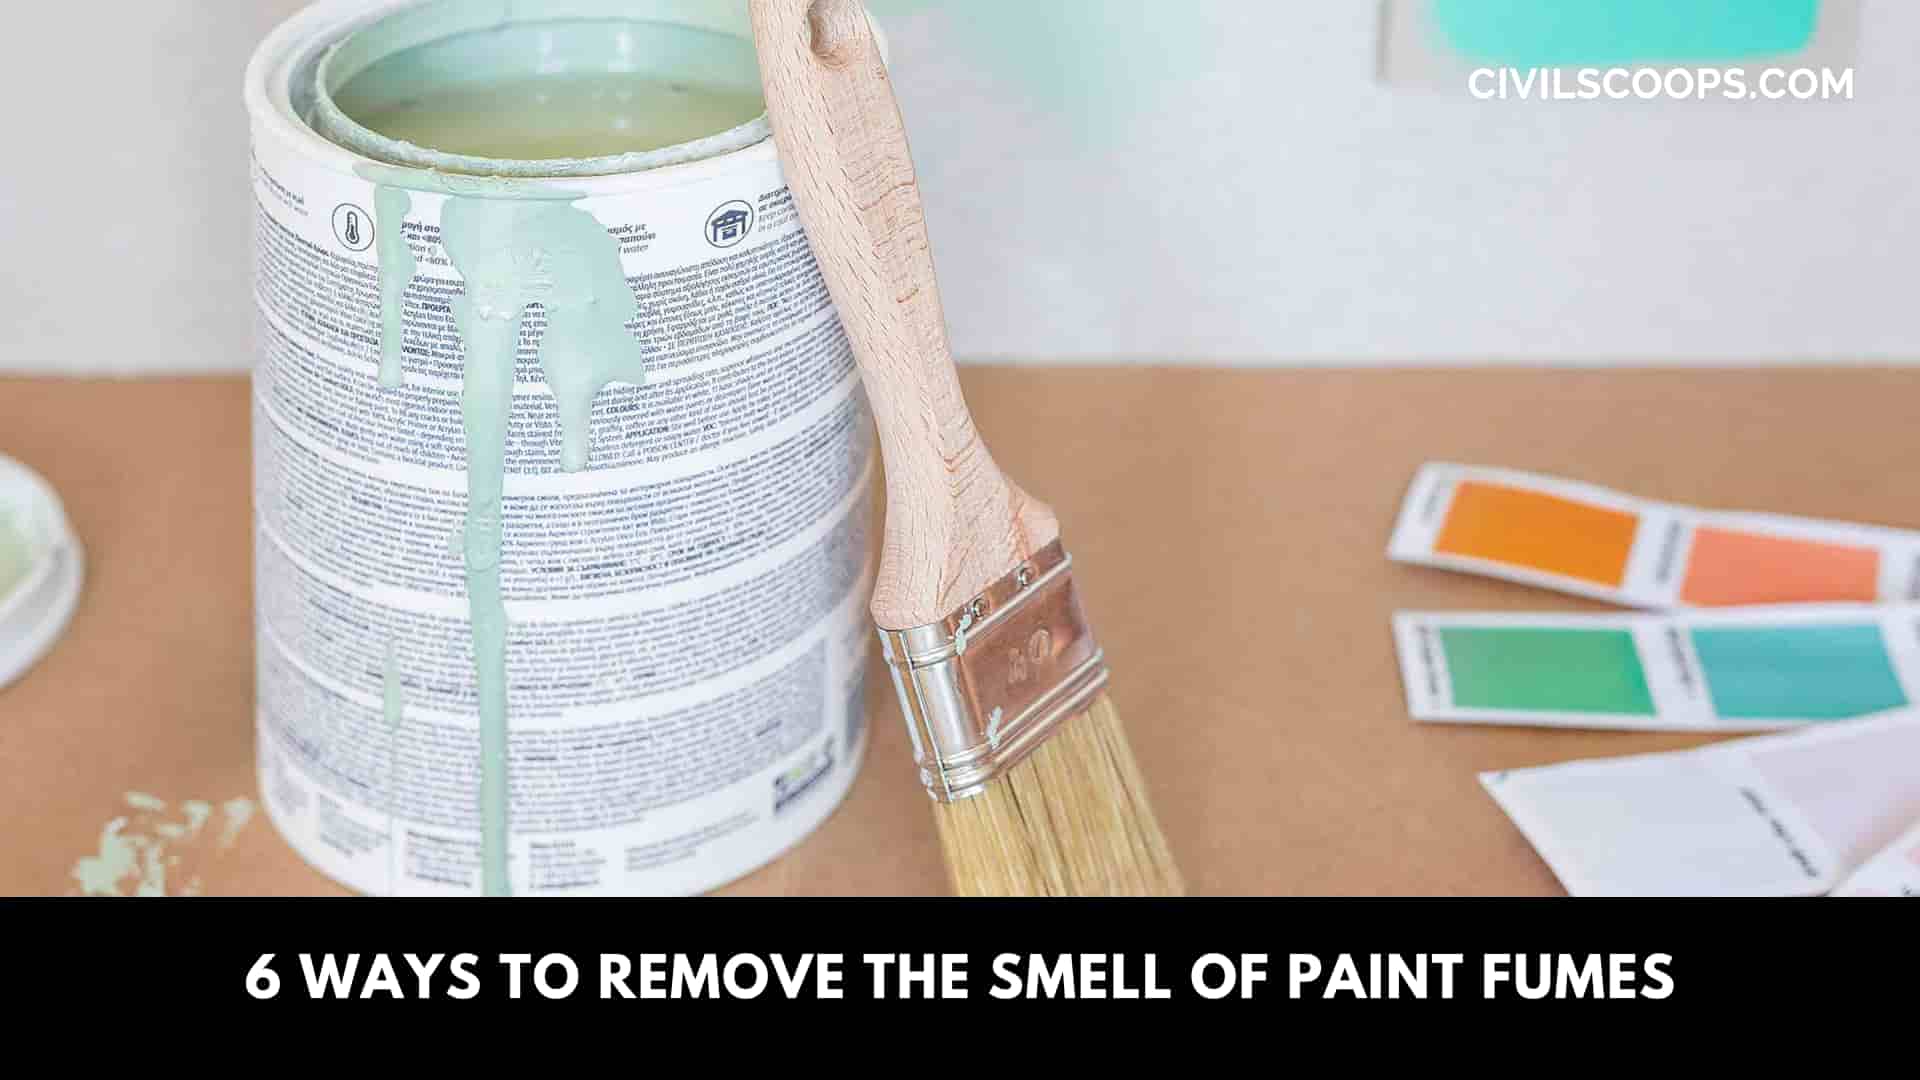 6 Ways to Remove the Smell of Paint Fumes